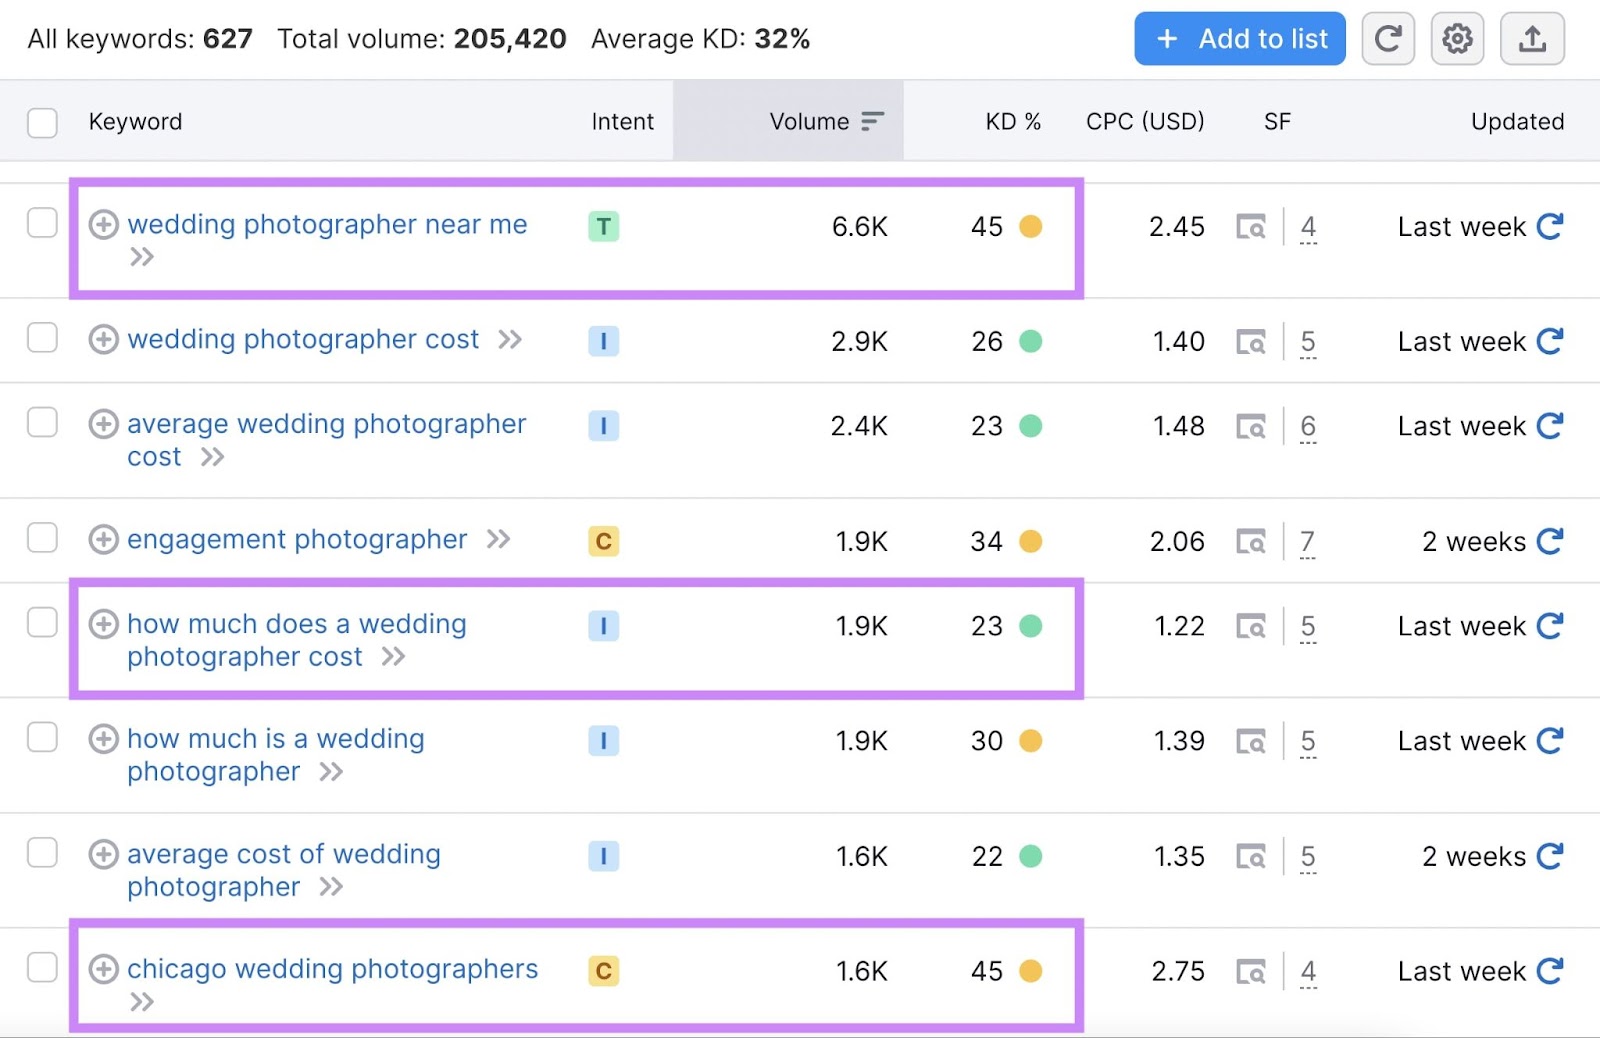 "wedding photographers near me" "how much is a wedding photographer" and "chicago wedding photographers" keyword results highlighted from the table